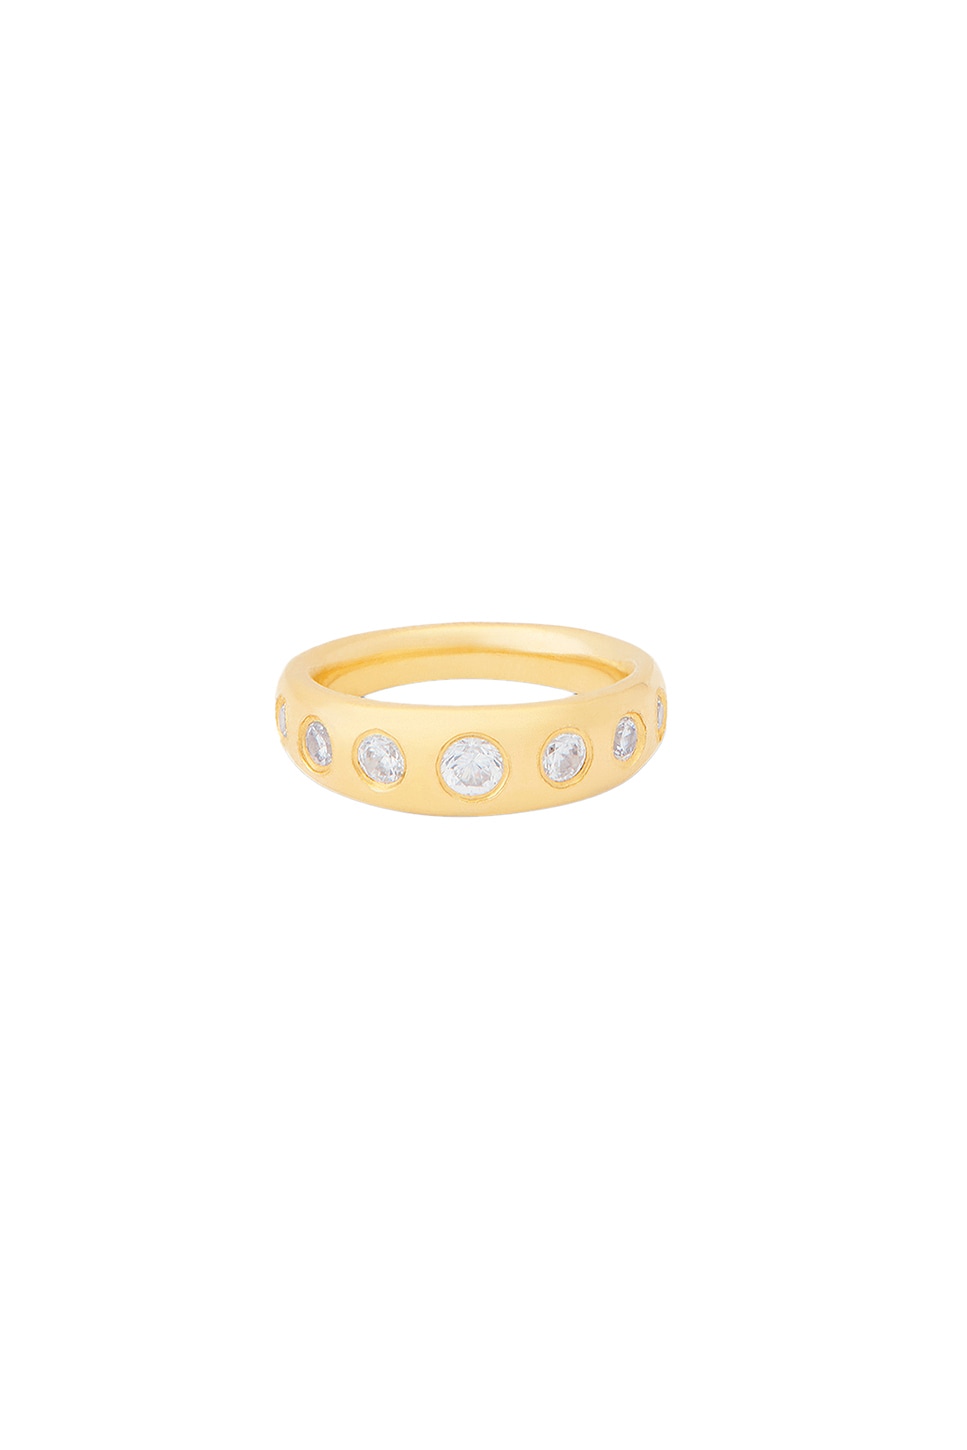 Image 1 of MEGA 7 Stone Pinky Ring in 14k Yellow Gold Plated